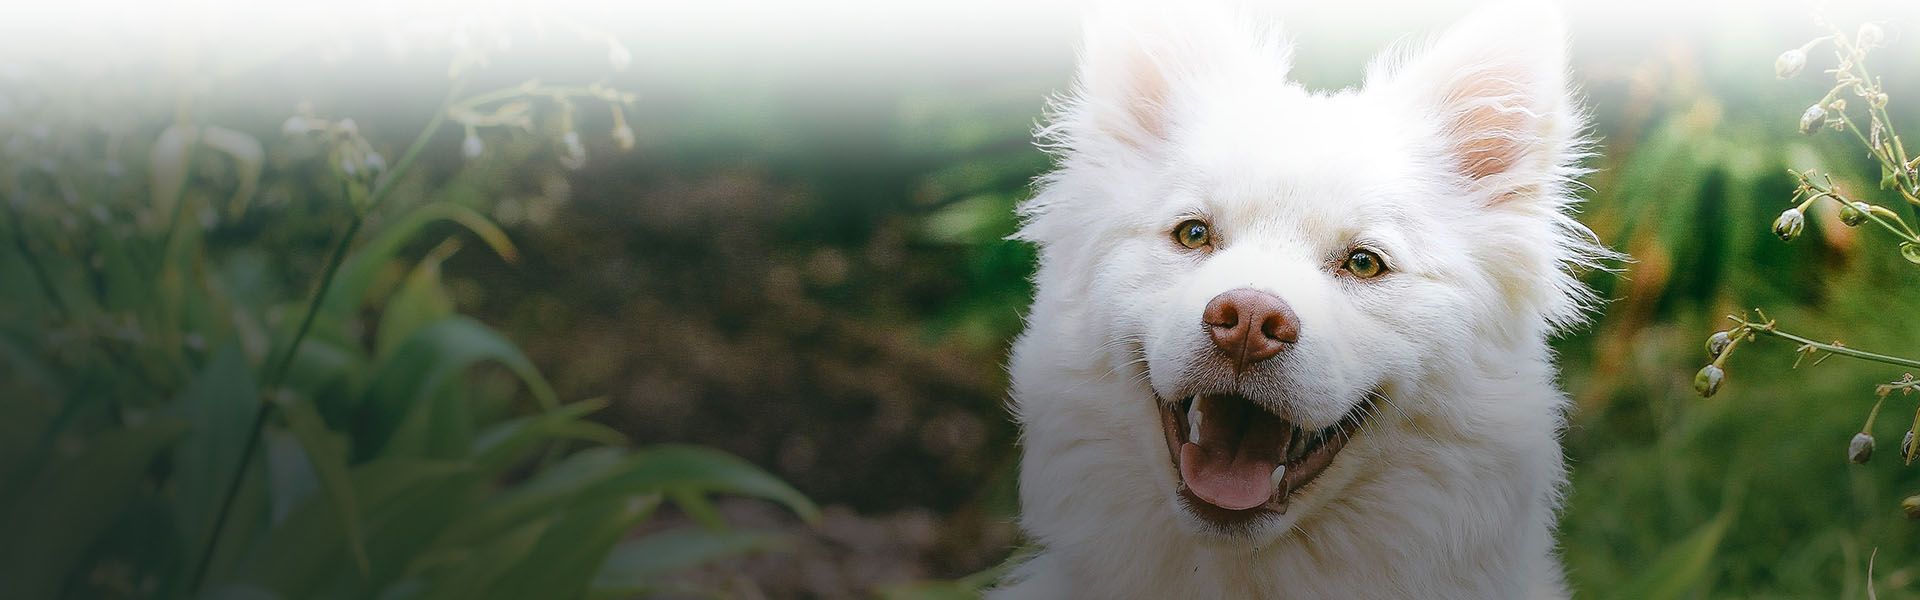 white happy dog sticking out tongue looking at camera with blurred green background